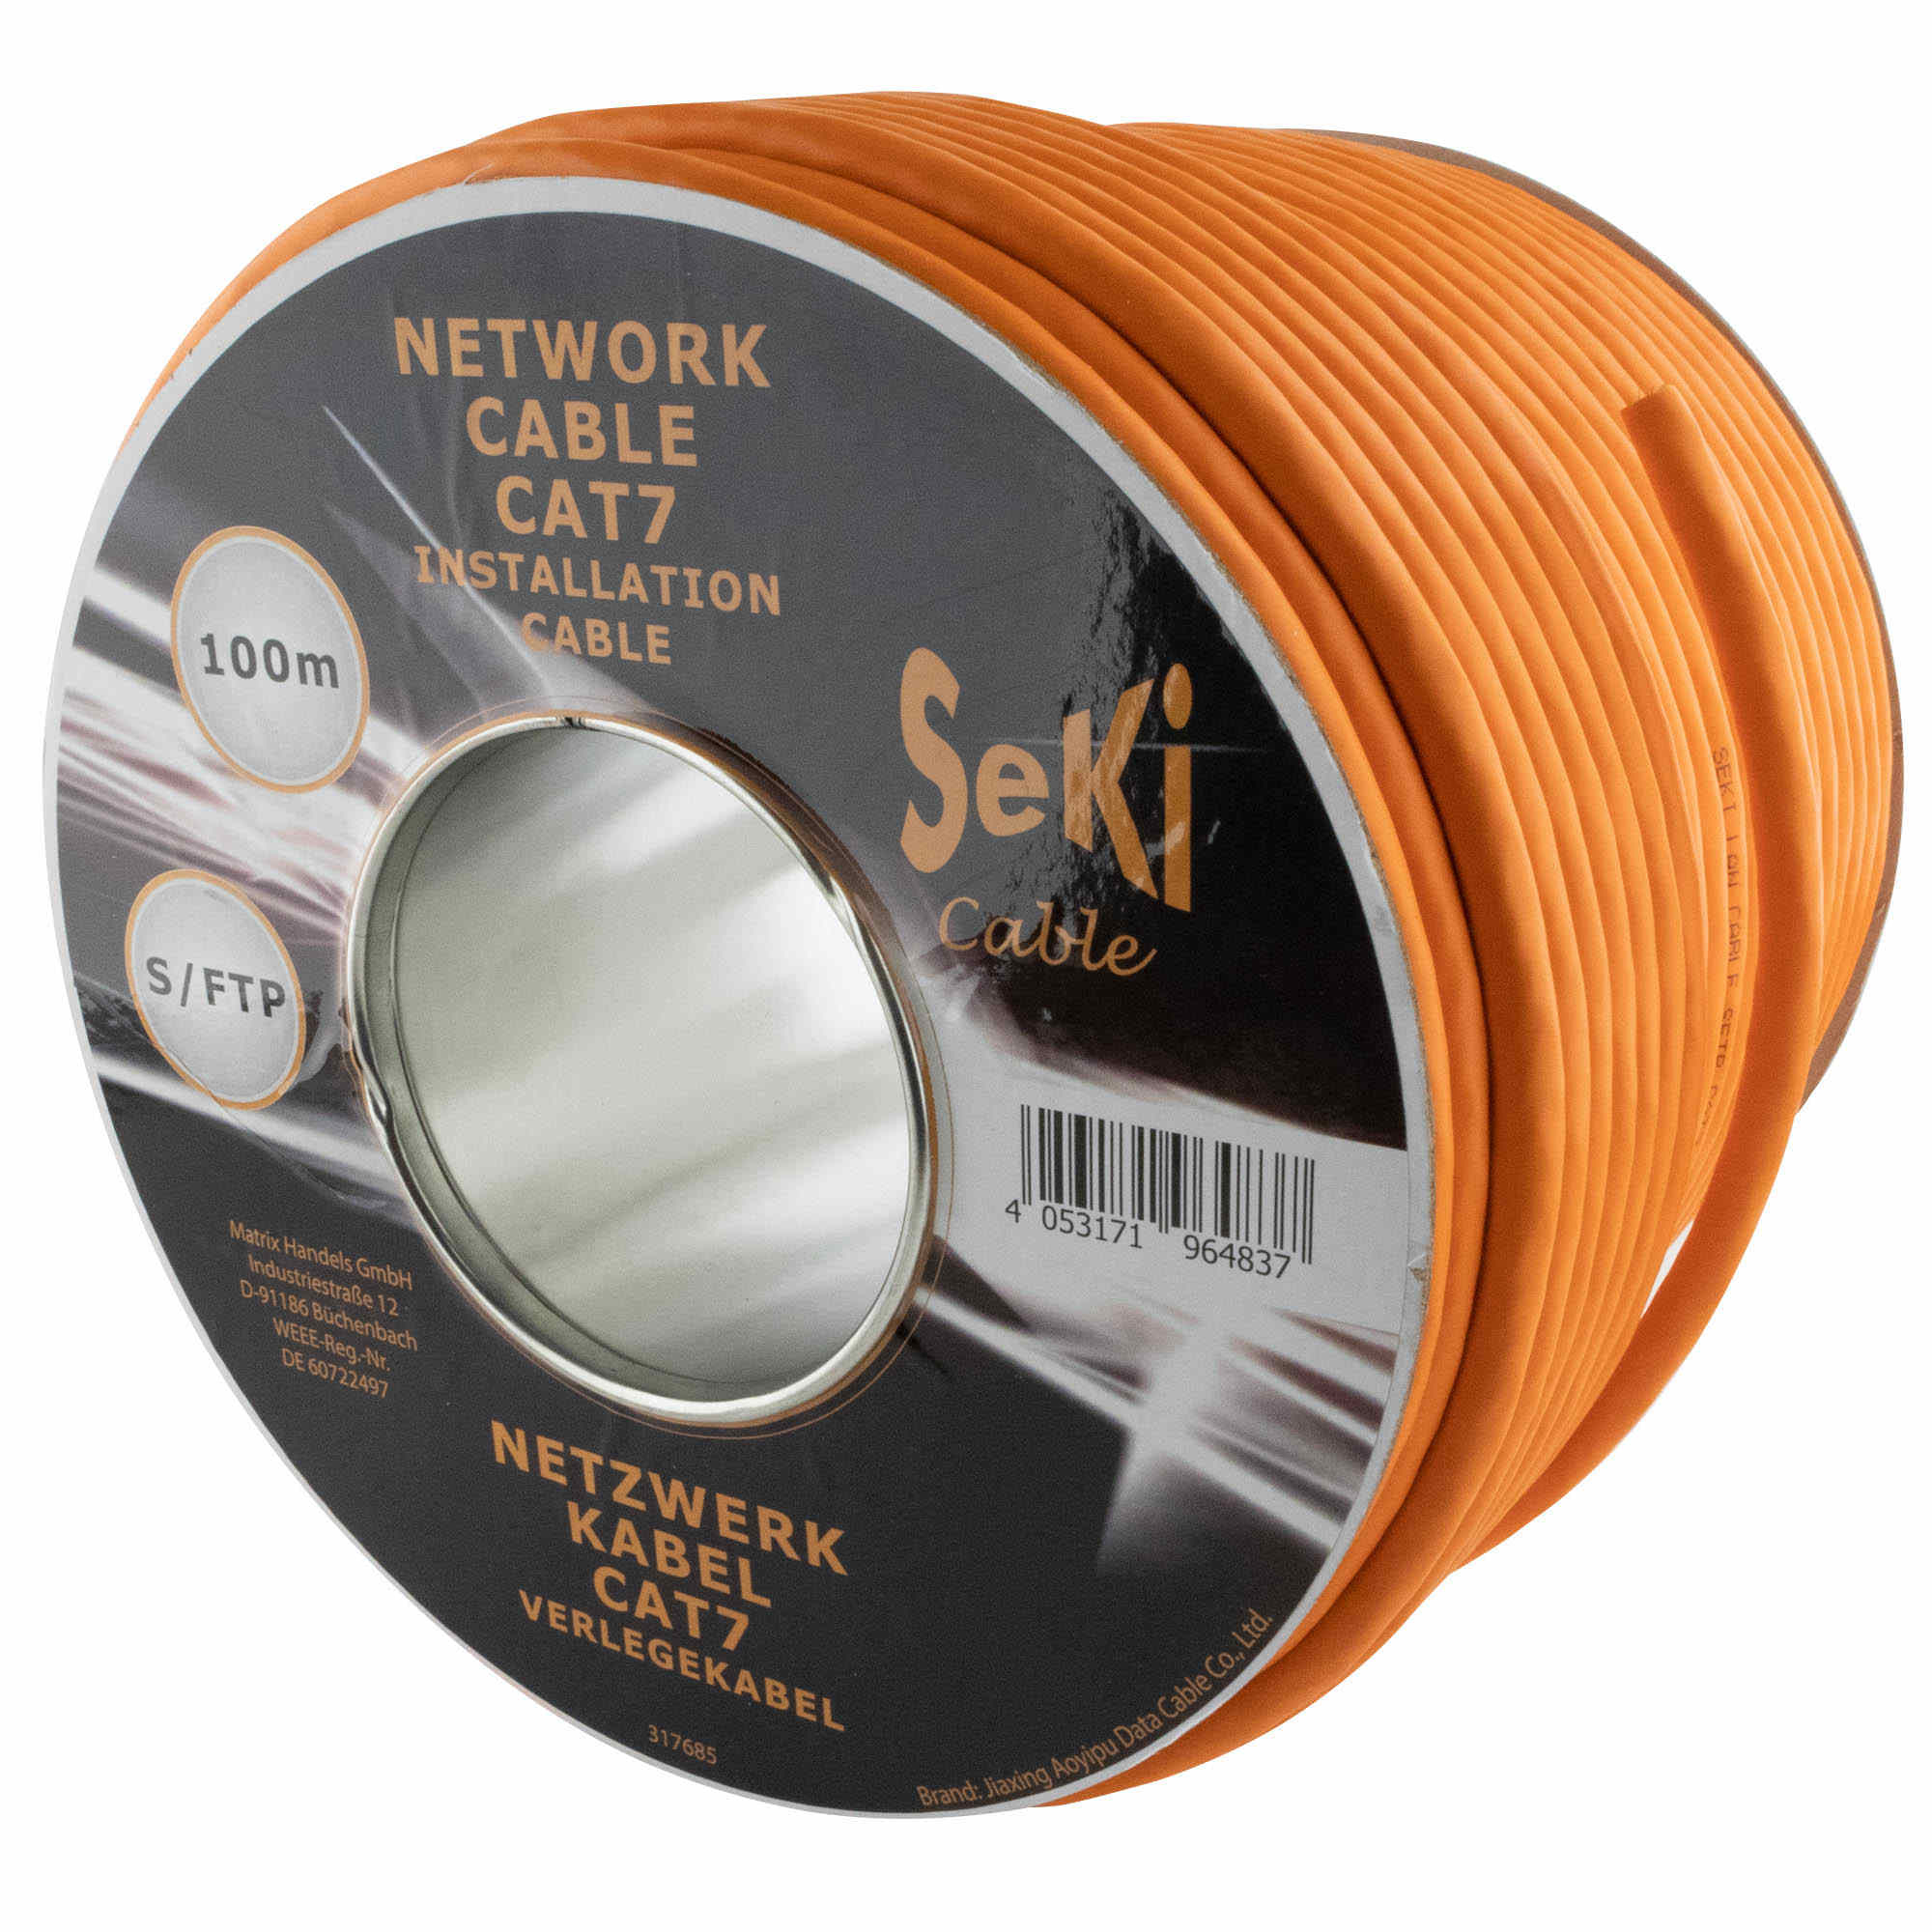 Network cable for installation Cat. 7, 100m